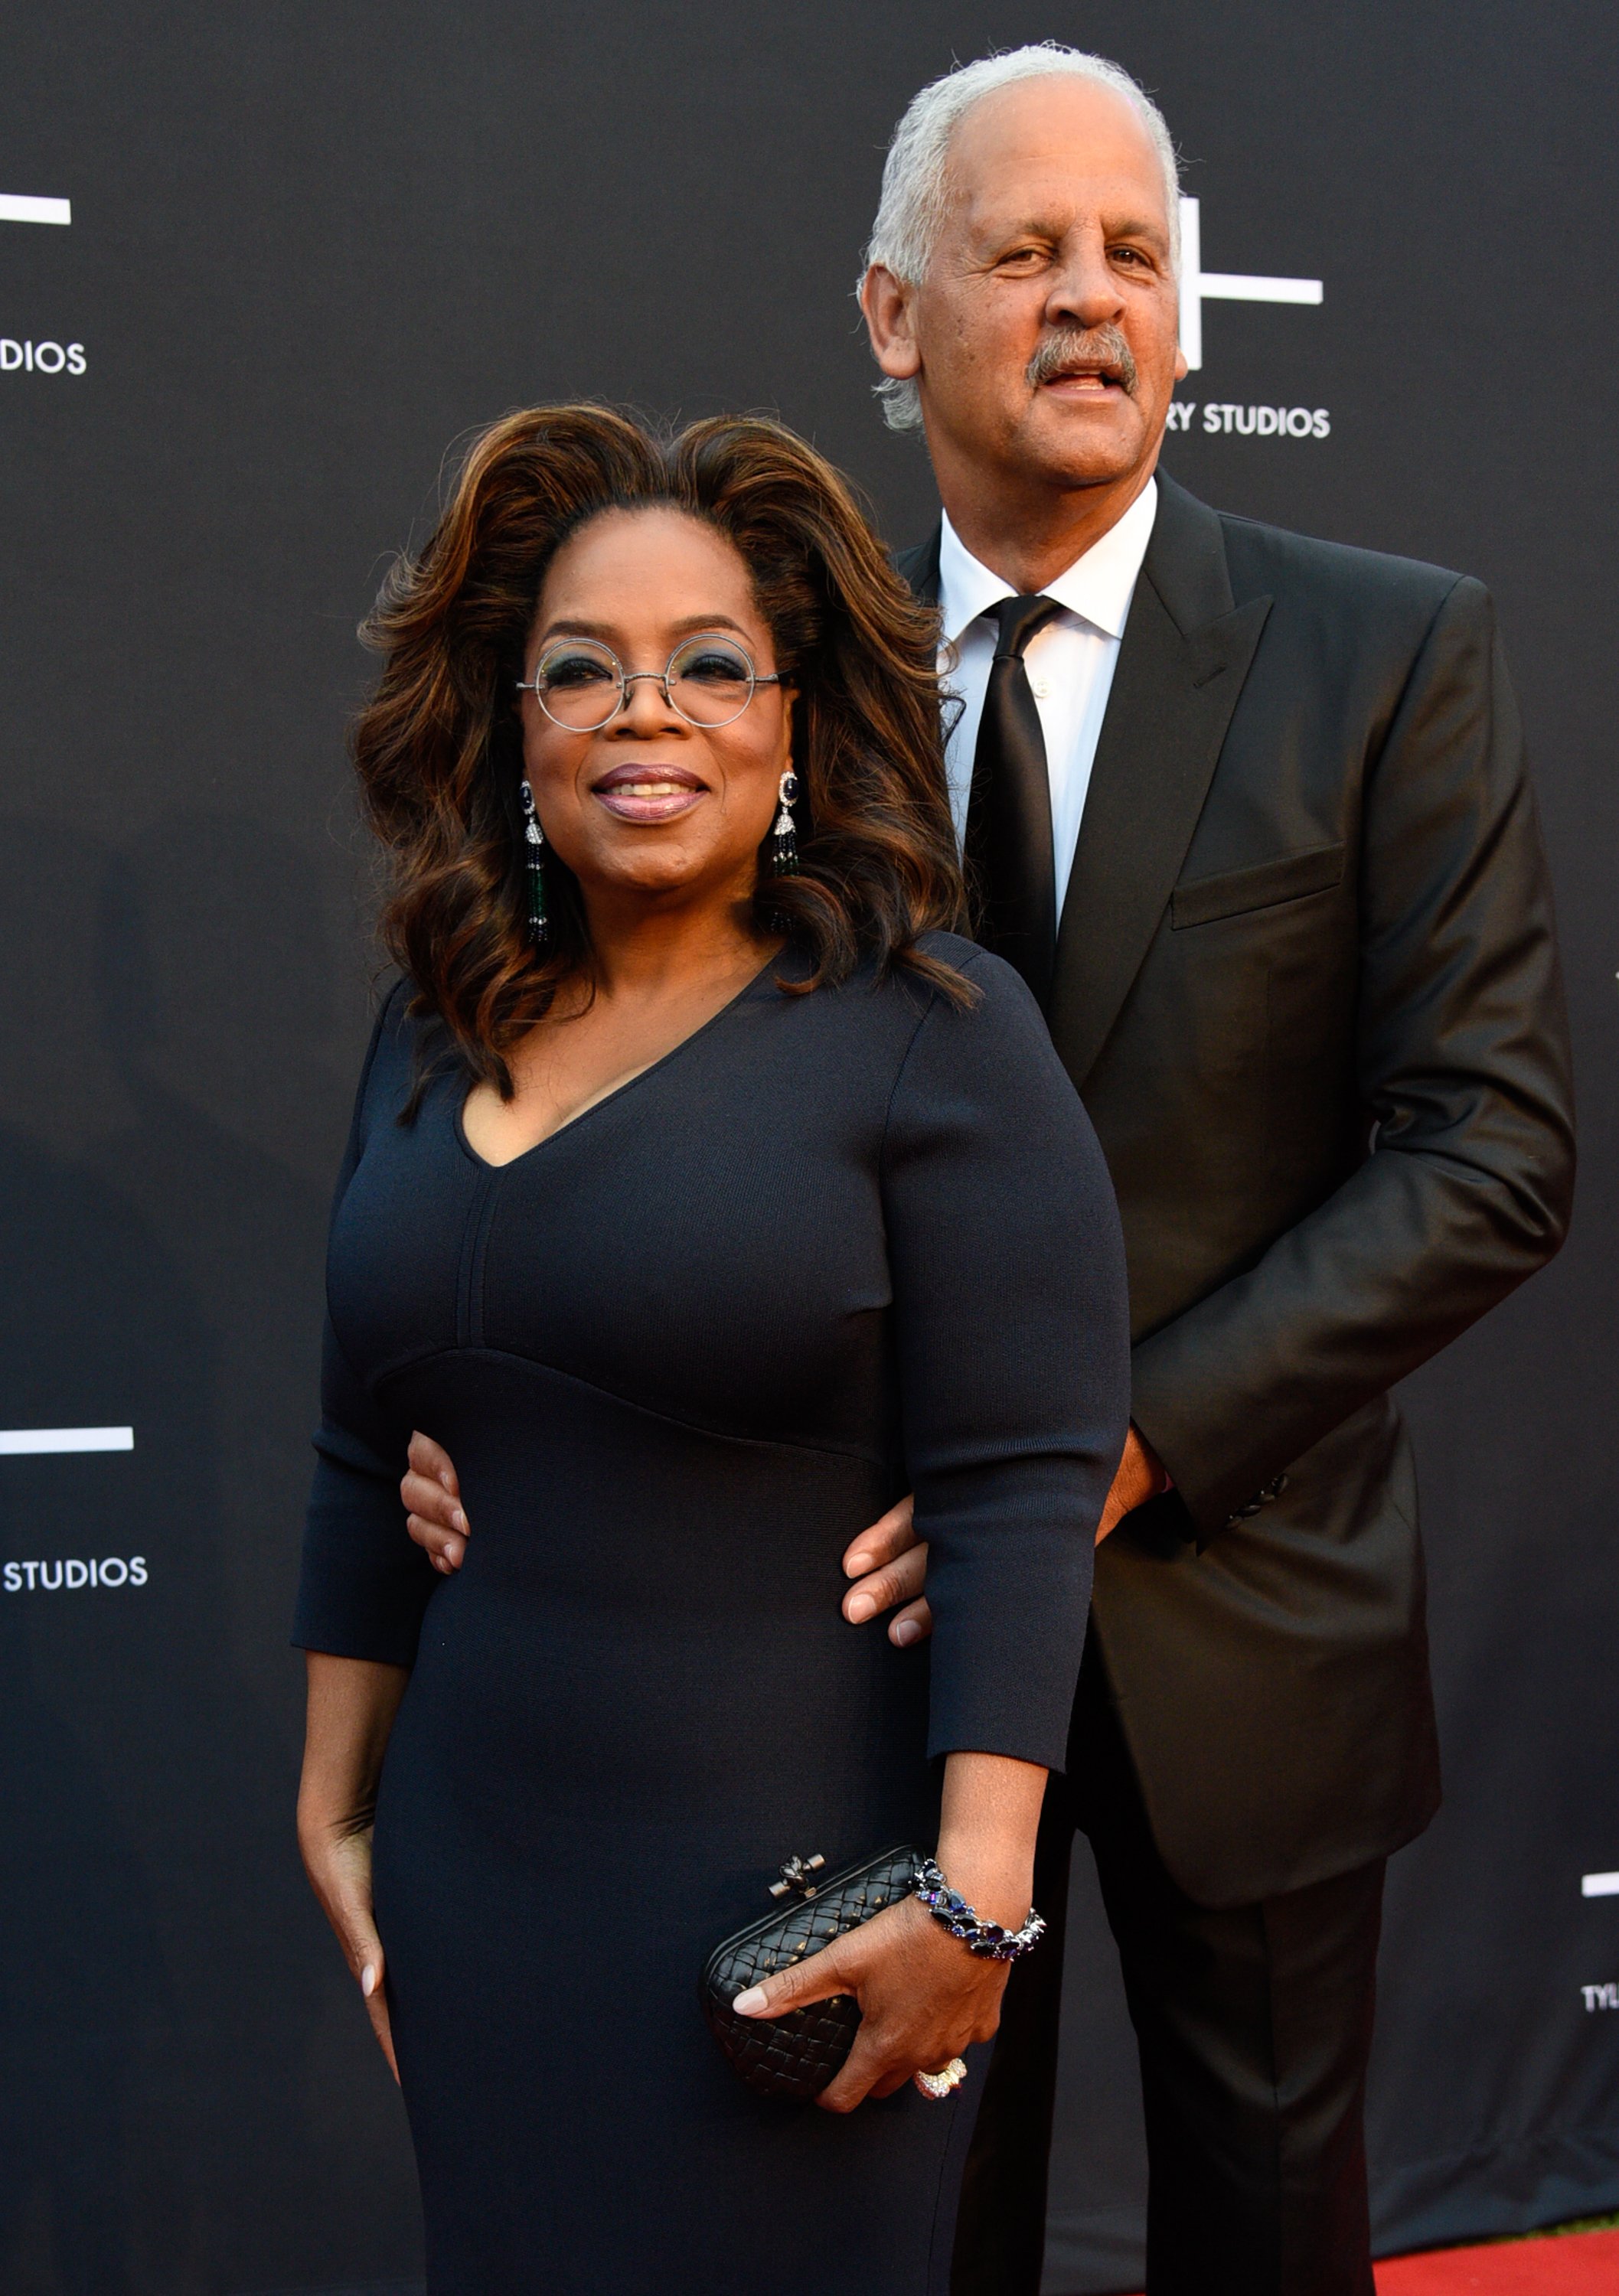 Oprah Winfrey and Stedman Graham attend Tyler Perry Studios grand opening gala on October 05, 2019 | Photo: Getty Images.